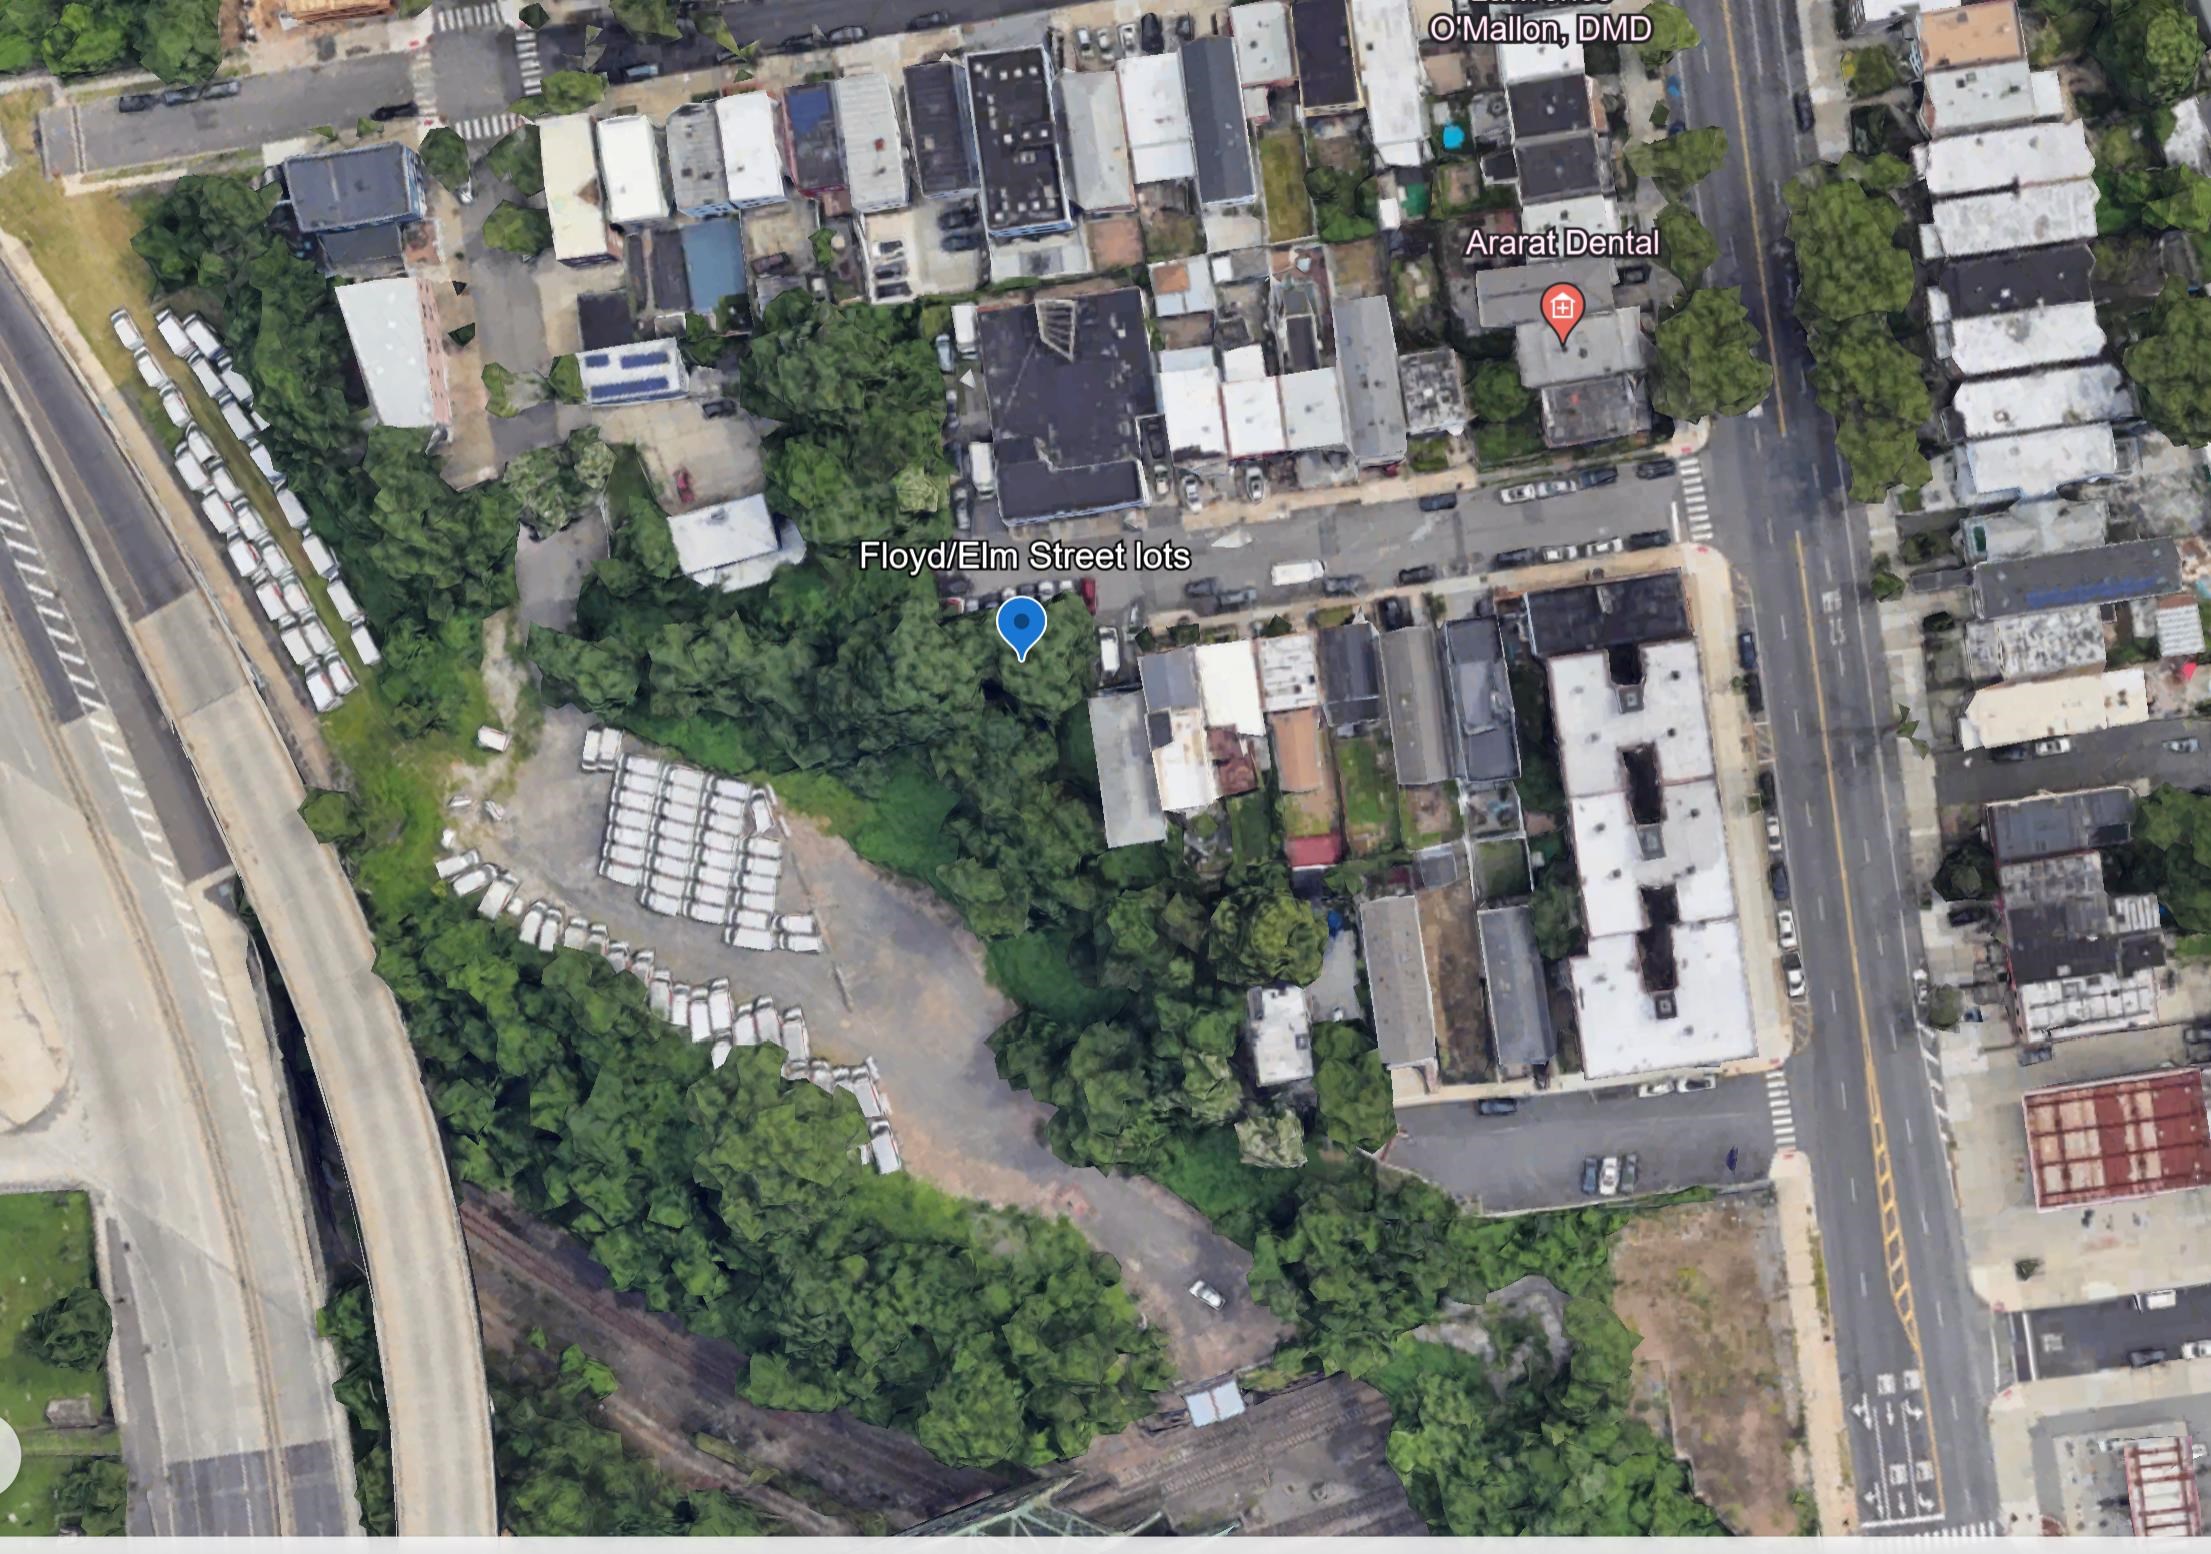 *Following lots in Block5403 must be sold together re: on Elm & Floyd Streets; Lots 1, 2, 3, 4, 5. and Lots 24, 25, 26 and 27. Floyd and Elm Street Lots are contiguous. Developers/Investors! Rare opportunity=9 vacant  lots in The Heights section appr.1 mile to Journal Square Path. Must be sold together.  Currently zoned in 1-2 residential. Sewer utilities located in both Floyd & Elm Streets. JCMUA water and sewer line maps attached to the mls.  (Topographical Survey uploaded to mls) Total lot size is approximately 26,364 sq.ft. or .605 acre. Completed 963page Environmental Study/Phase 1 (avail upon request) While an excerpt of Phase 1 is uploaded to mls. Bd. of Adj. application anticipated for variance to allow multi-unit building.  Final variance approval is the responsibility of the Buyer. Additional to current description of land.....PRICE REDUCTION is based on drawings that provide proposal for 79 units requiring 1 height variance for 9 lots. Possible for more units but requires more variances and construction costs.  In addition, lot 15 may be purchased but at an additional cost per negotiations. Drawings for 79 units are attached.  Absolutely, No access to vacant lots permitted from either Liberty or Floyd Avenues. Absolutely no showings/access to vacant lots from Elm Street without confirmed appointment.  Perspective buyers may NOT view vacant lots without written permission and may not enter owners property without an appointment confirmed in writing. Trespassers will be prosecuted.